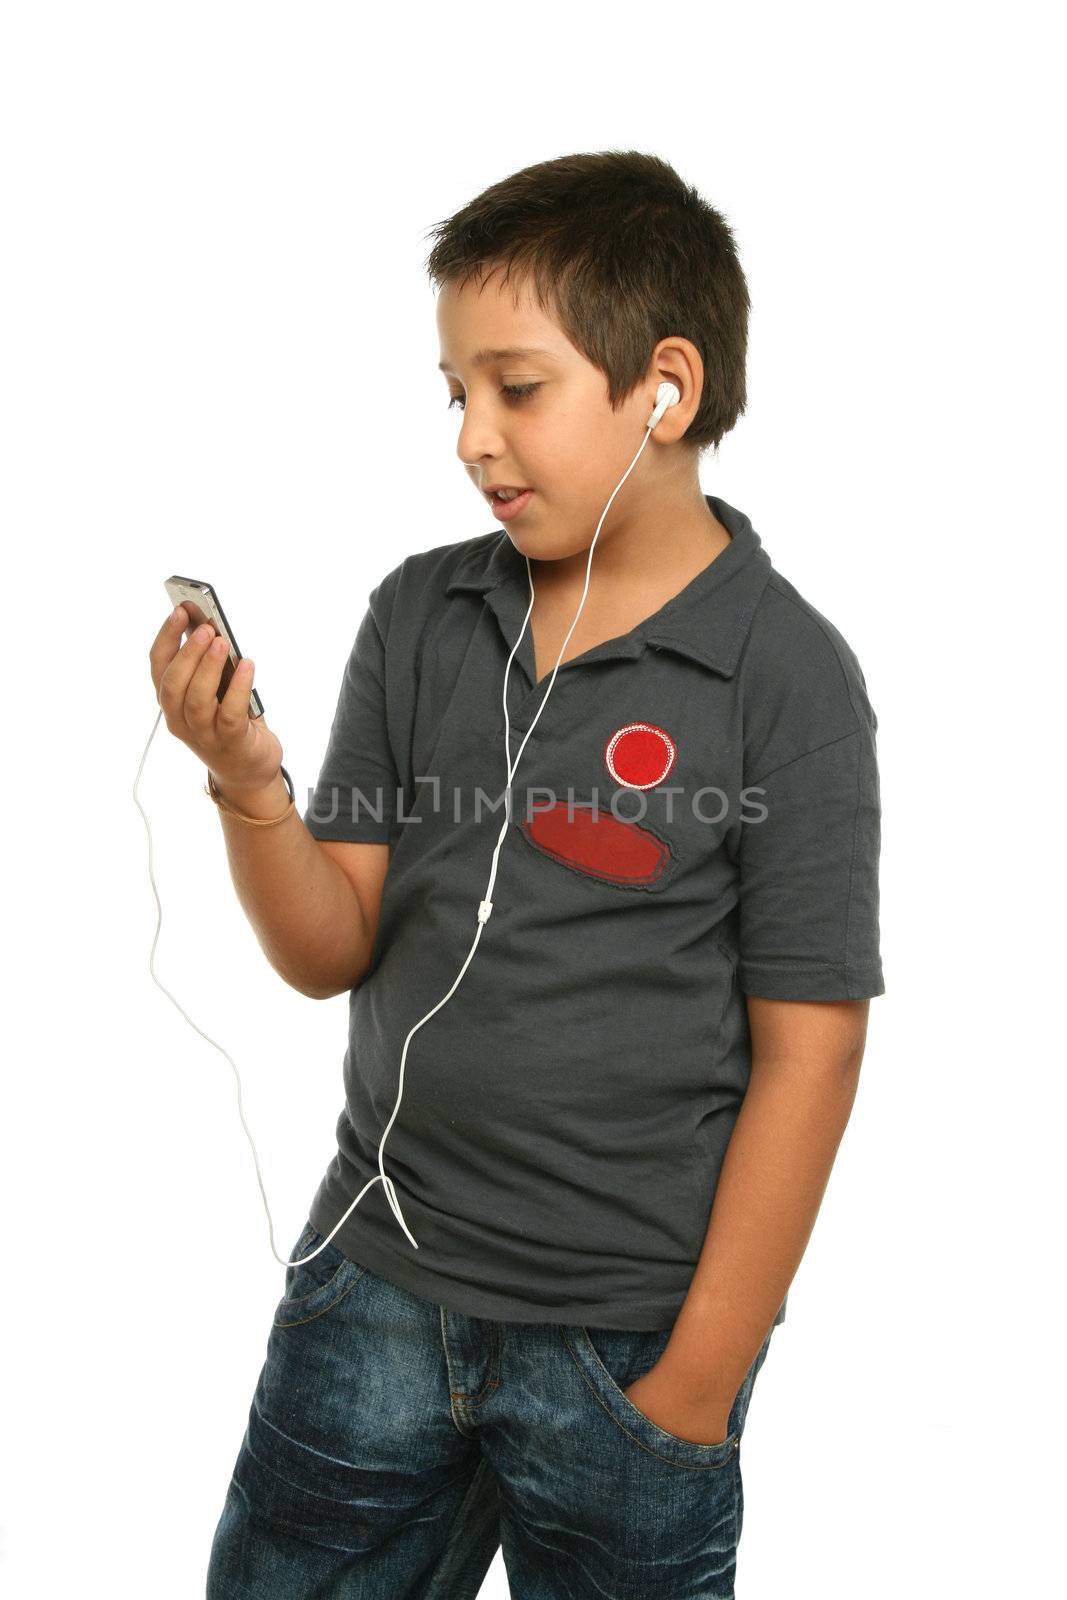 Cool boy listening music with a mp4 player by Erdosain